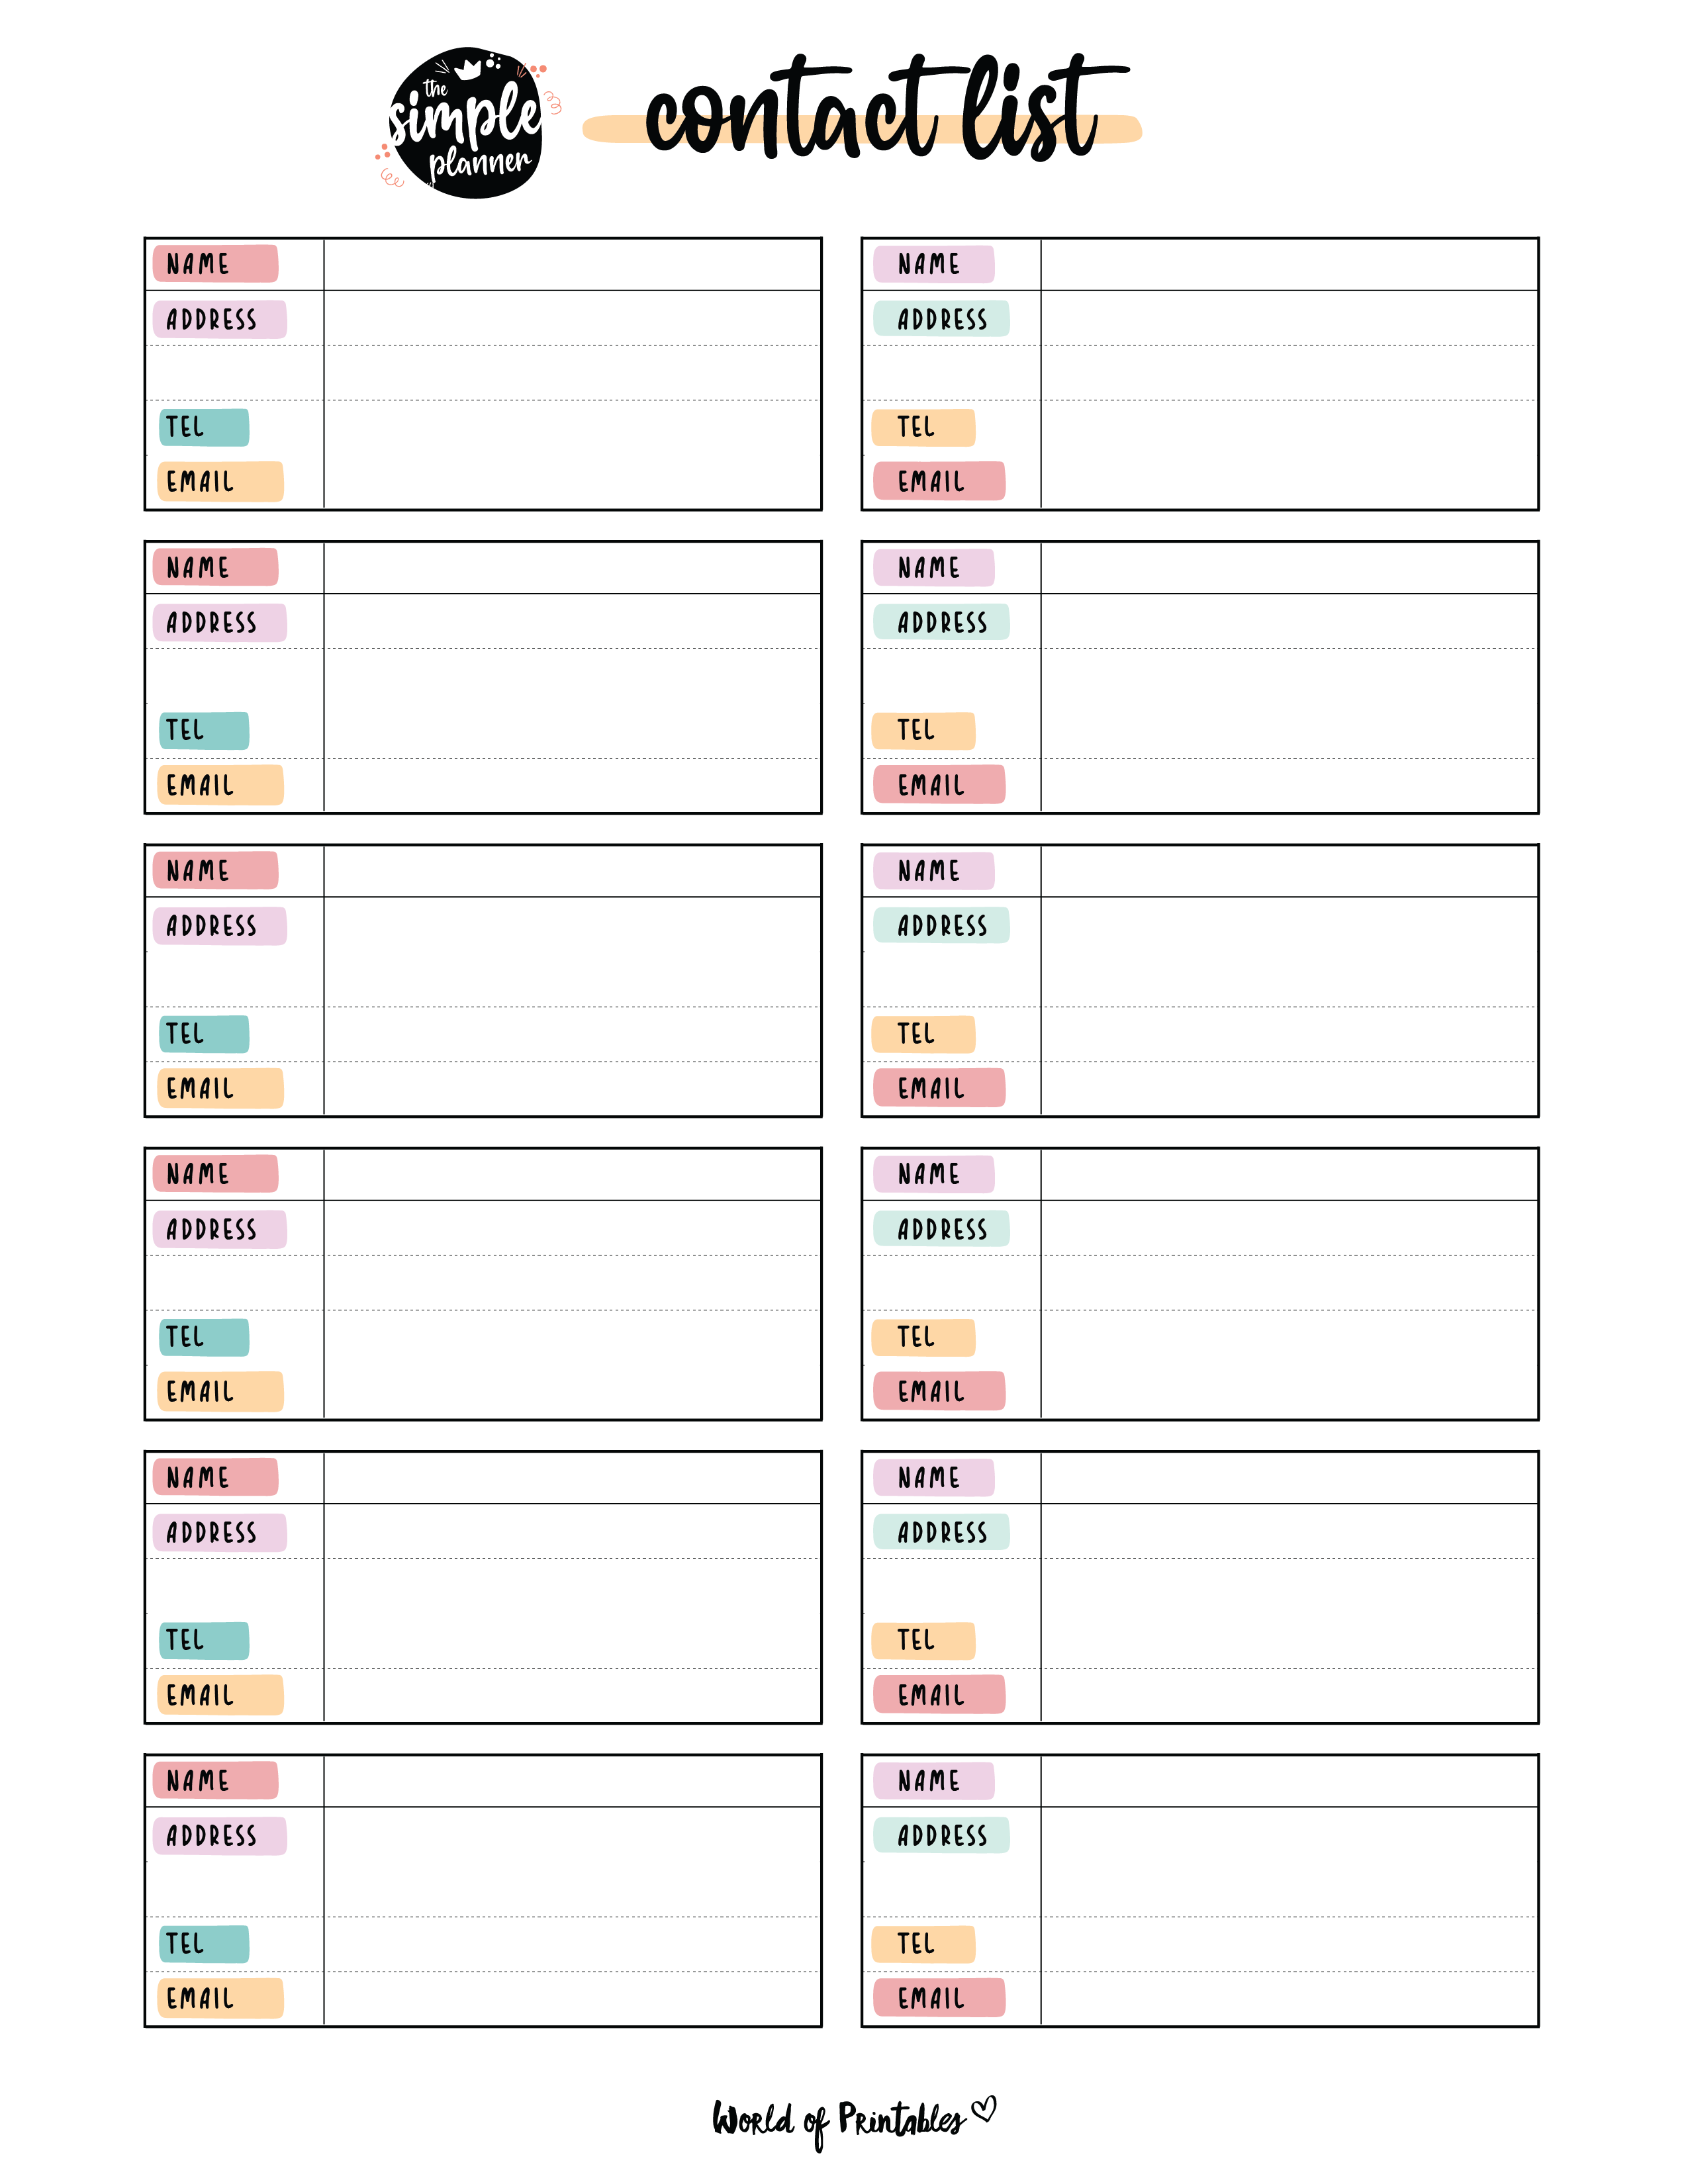 Contact List Templates 12 Of The Best Styles World of Printables